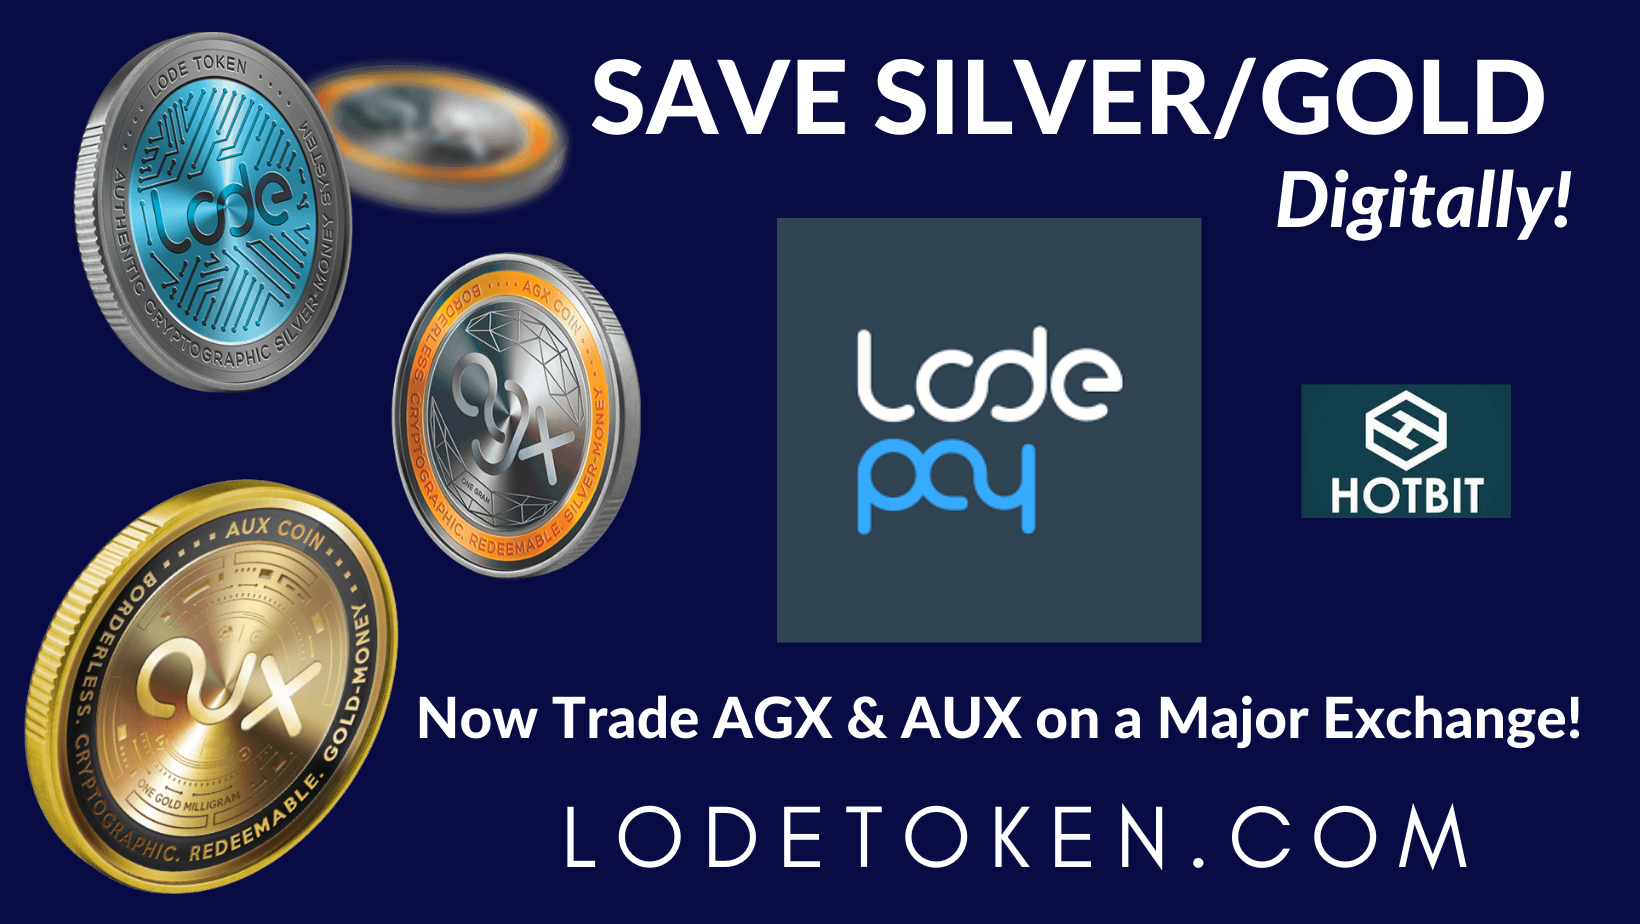 LODE ..SAVE GOLD SILVER DIGITALLY 2.0 - Chargers Avoid Collapse -Shut Down Bengals After Their Lead Vanished From 24-0 to 24-22